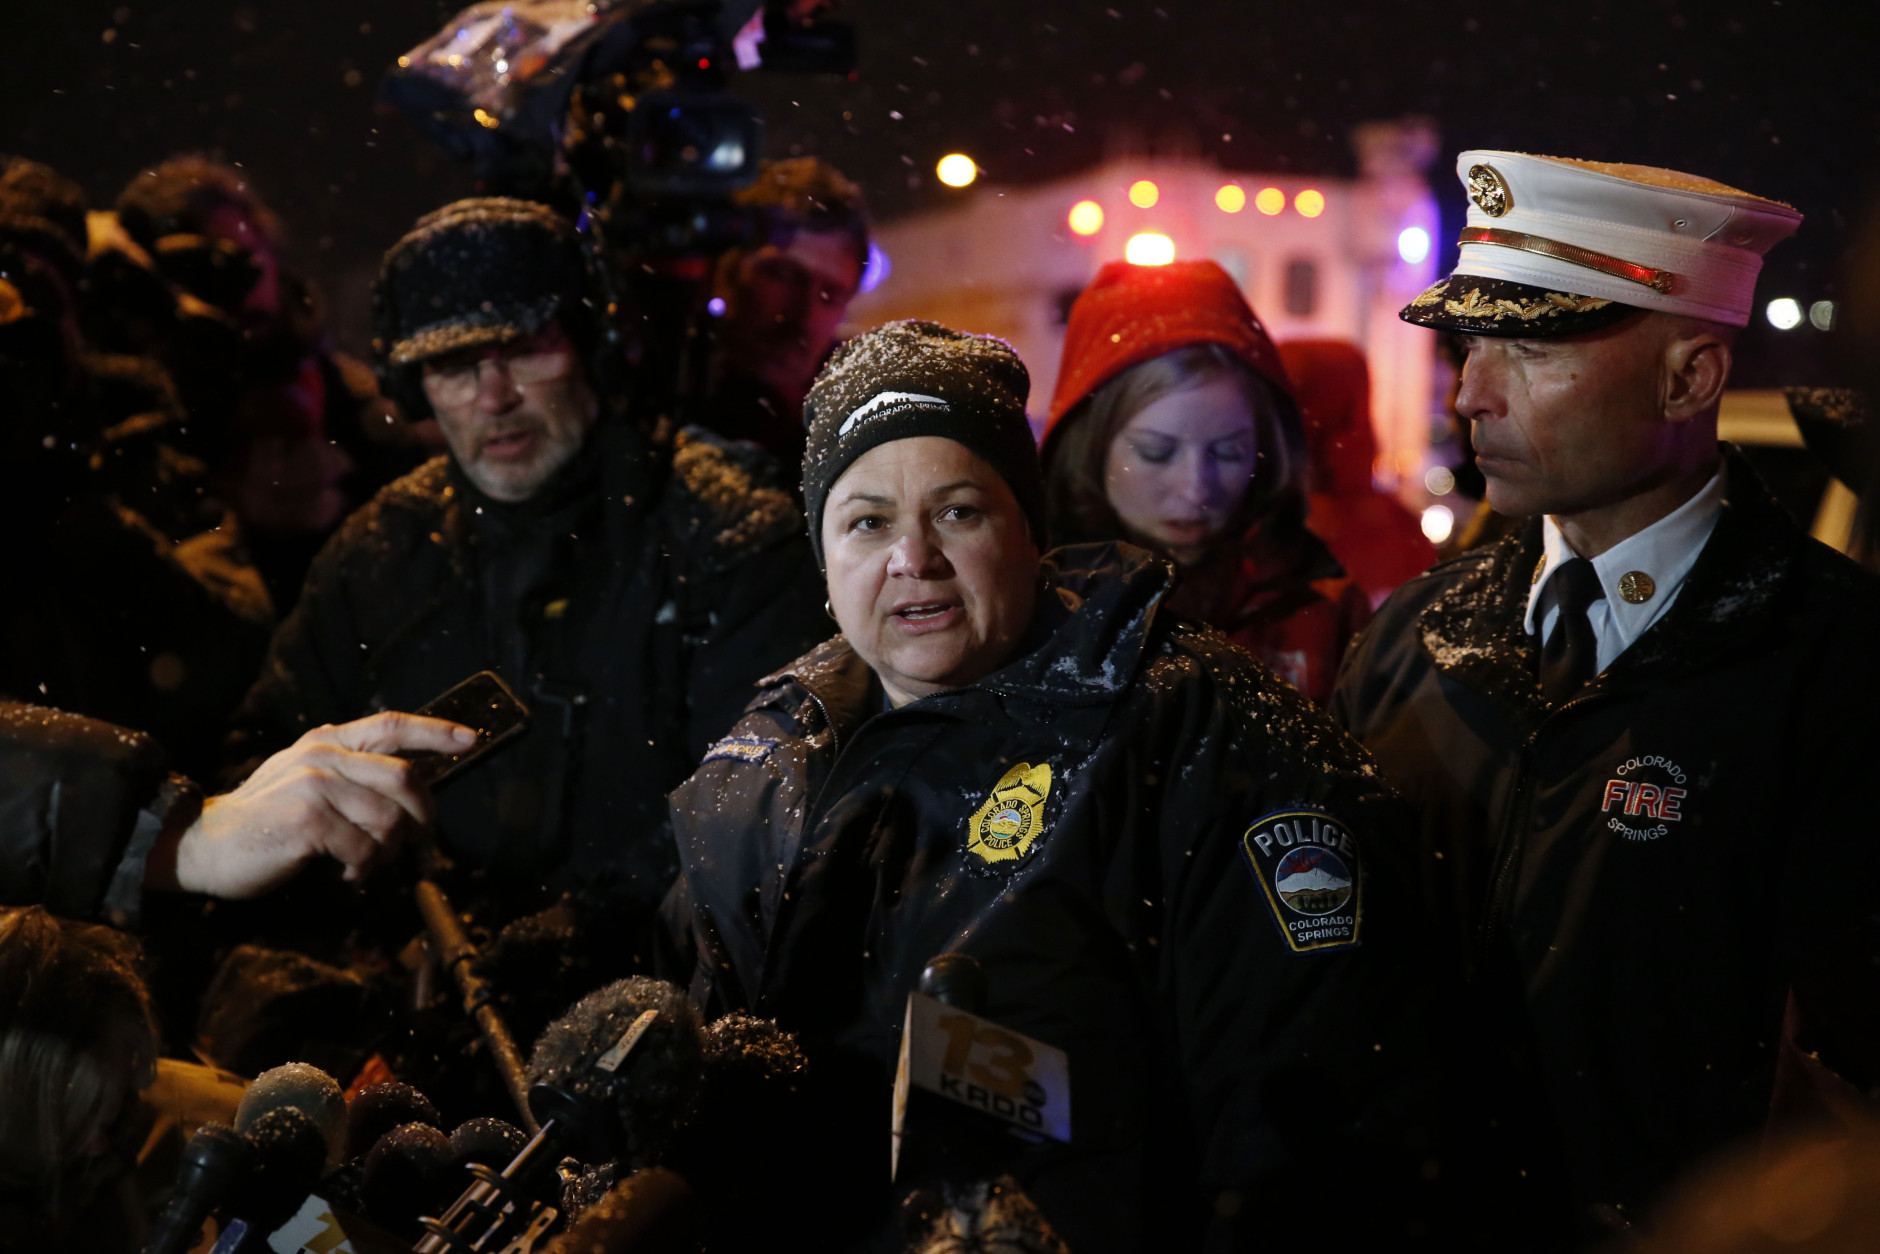 Lt. Catherine Buckley, center, of the Colorado Springs Police Department, talk to members of the media as Fire Chief Christopher Riley, right, looks on after a shooting at a Planned Parenthood clinic Friday, Nov. 27, 2015, in Colorado Springs, Colo. (AP Photo/David Zalubowski)